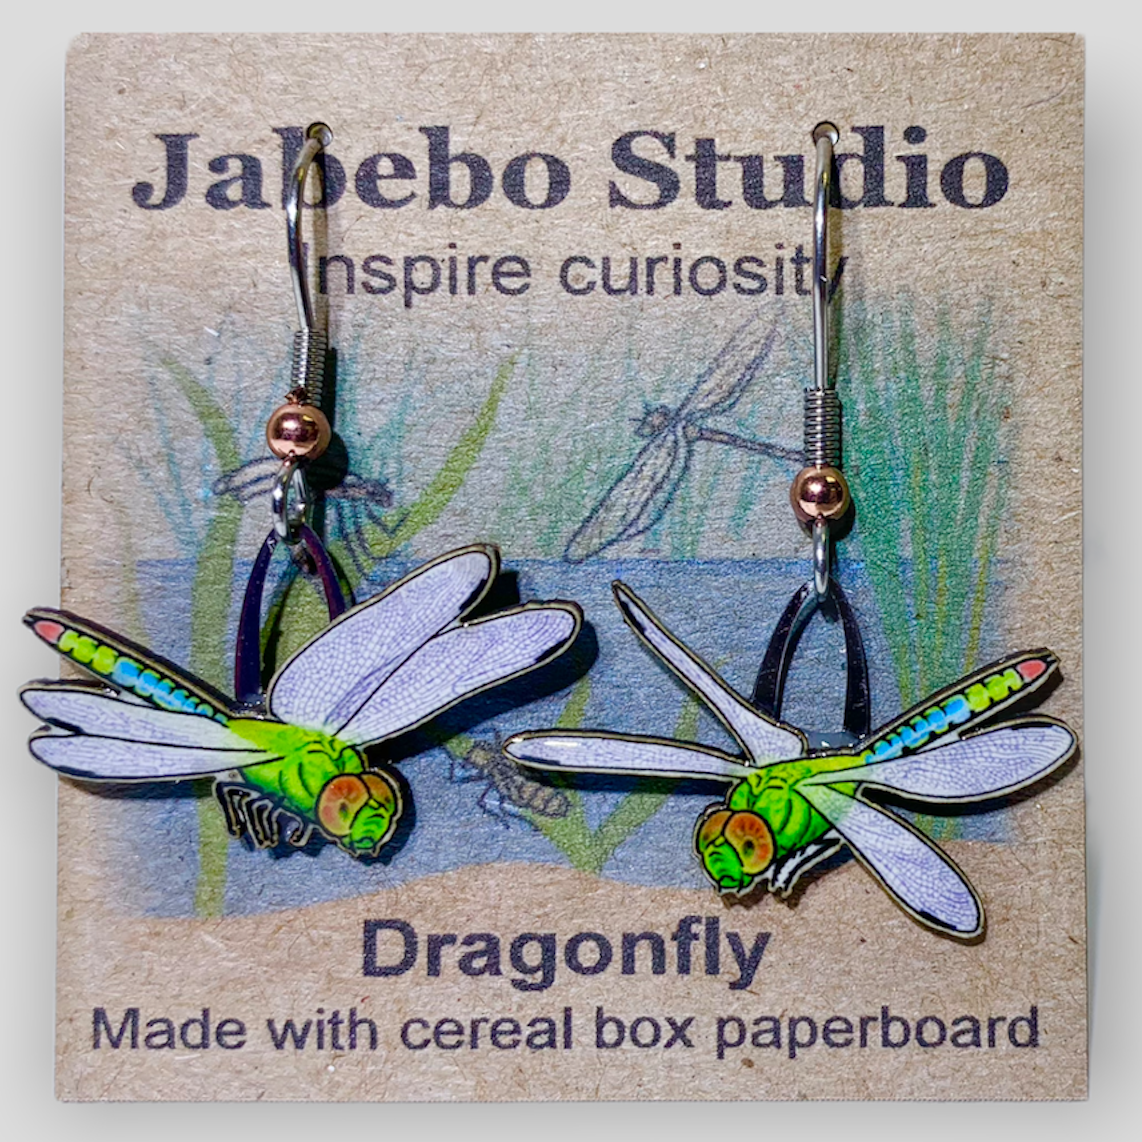 Picture shown is of 1 inch tall pair of earrings of the bug the Dragonfly.